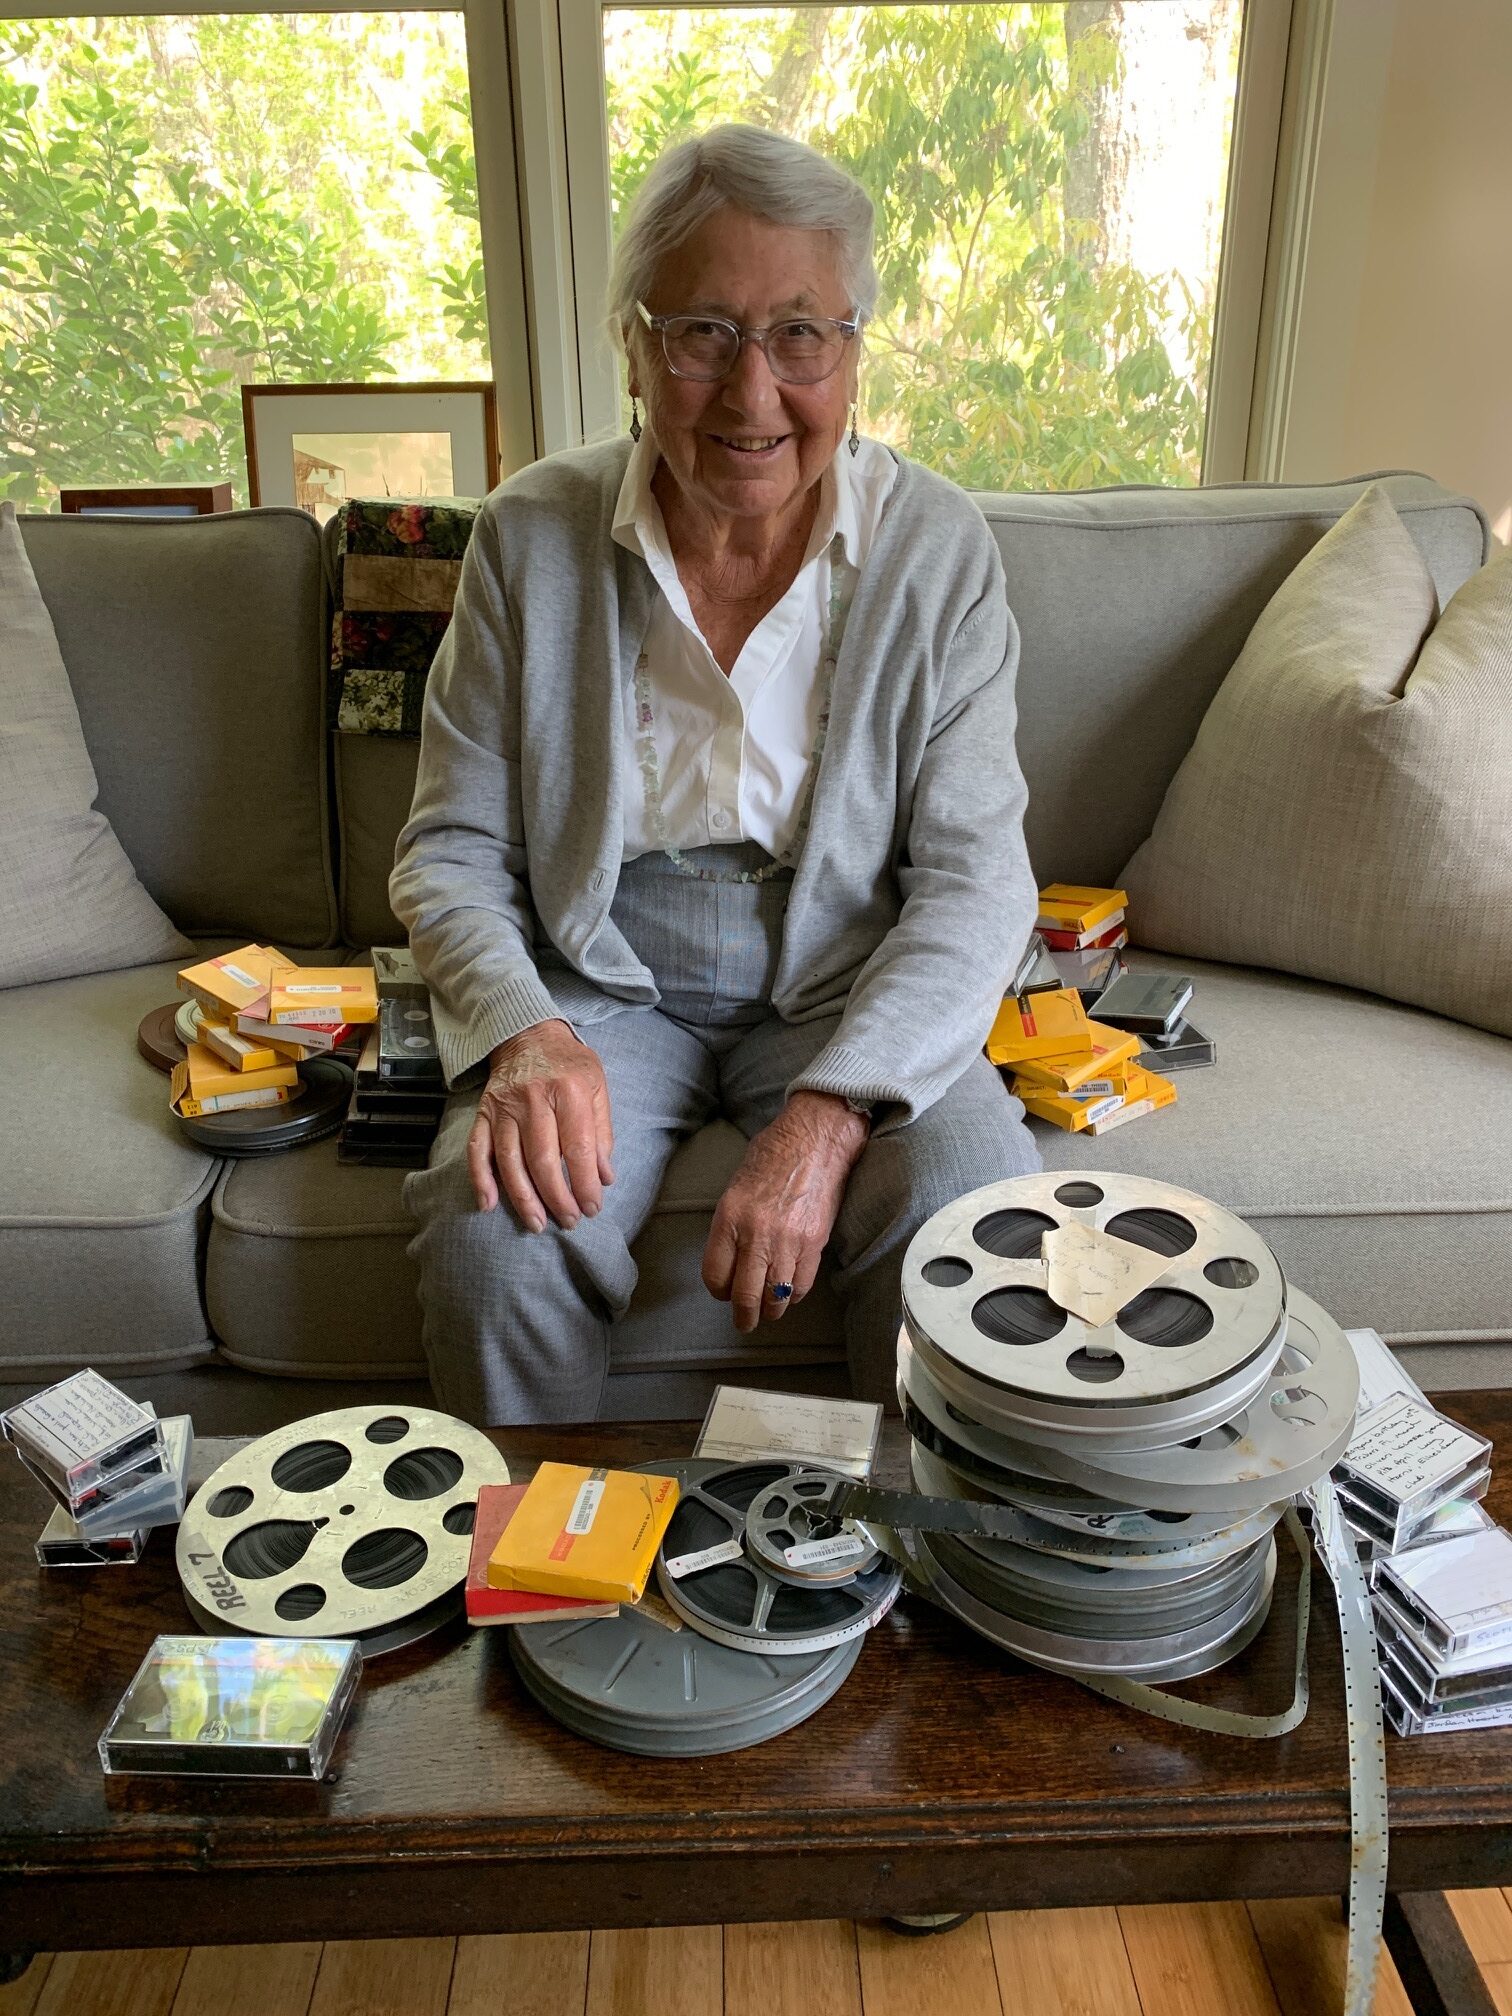 Nada Barry has been taking home movies for years. Now some of them are available for public viewing on YouTube. GWEN WORTHINGTON